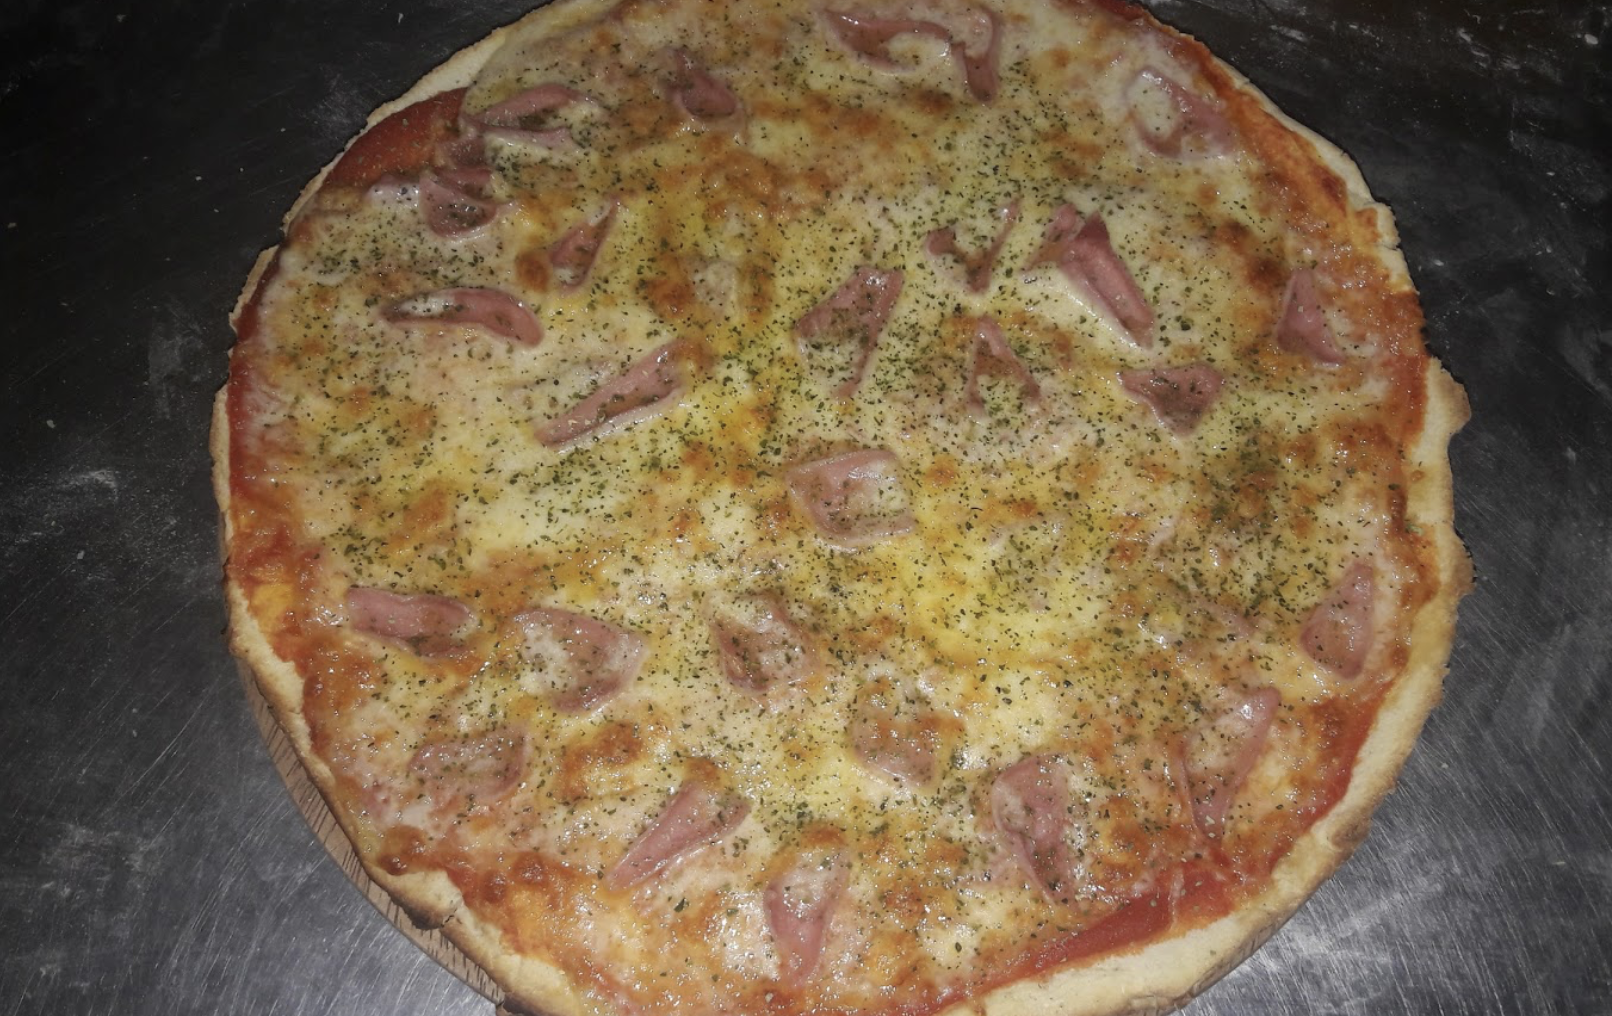 A full gluten free pizza topped with ham and black pepper